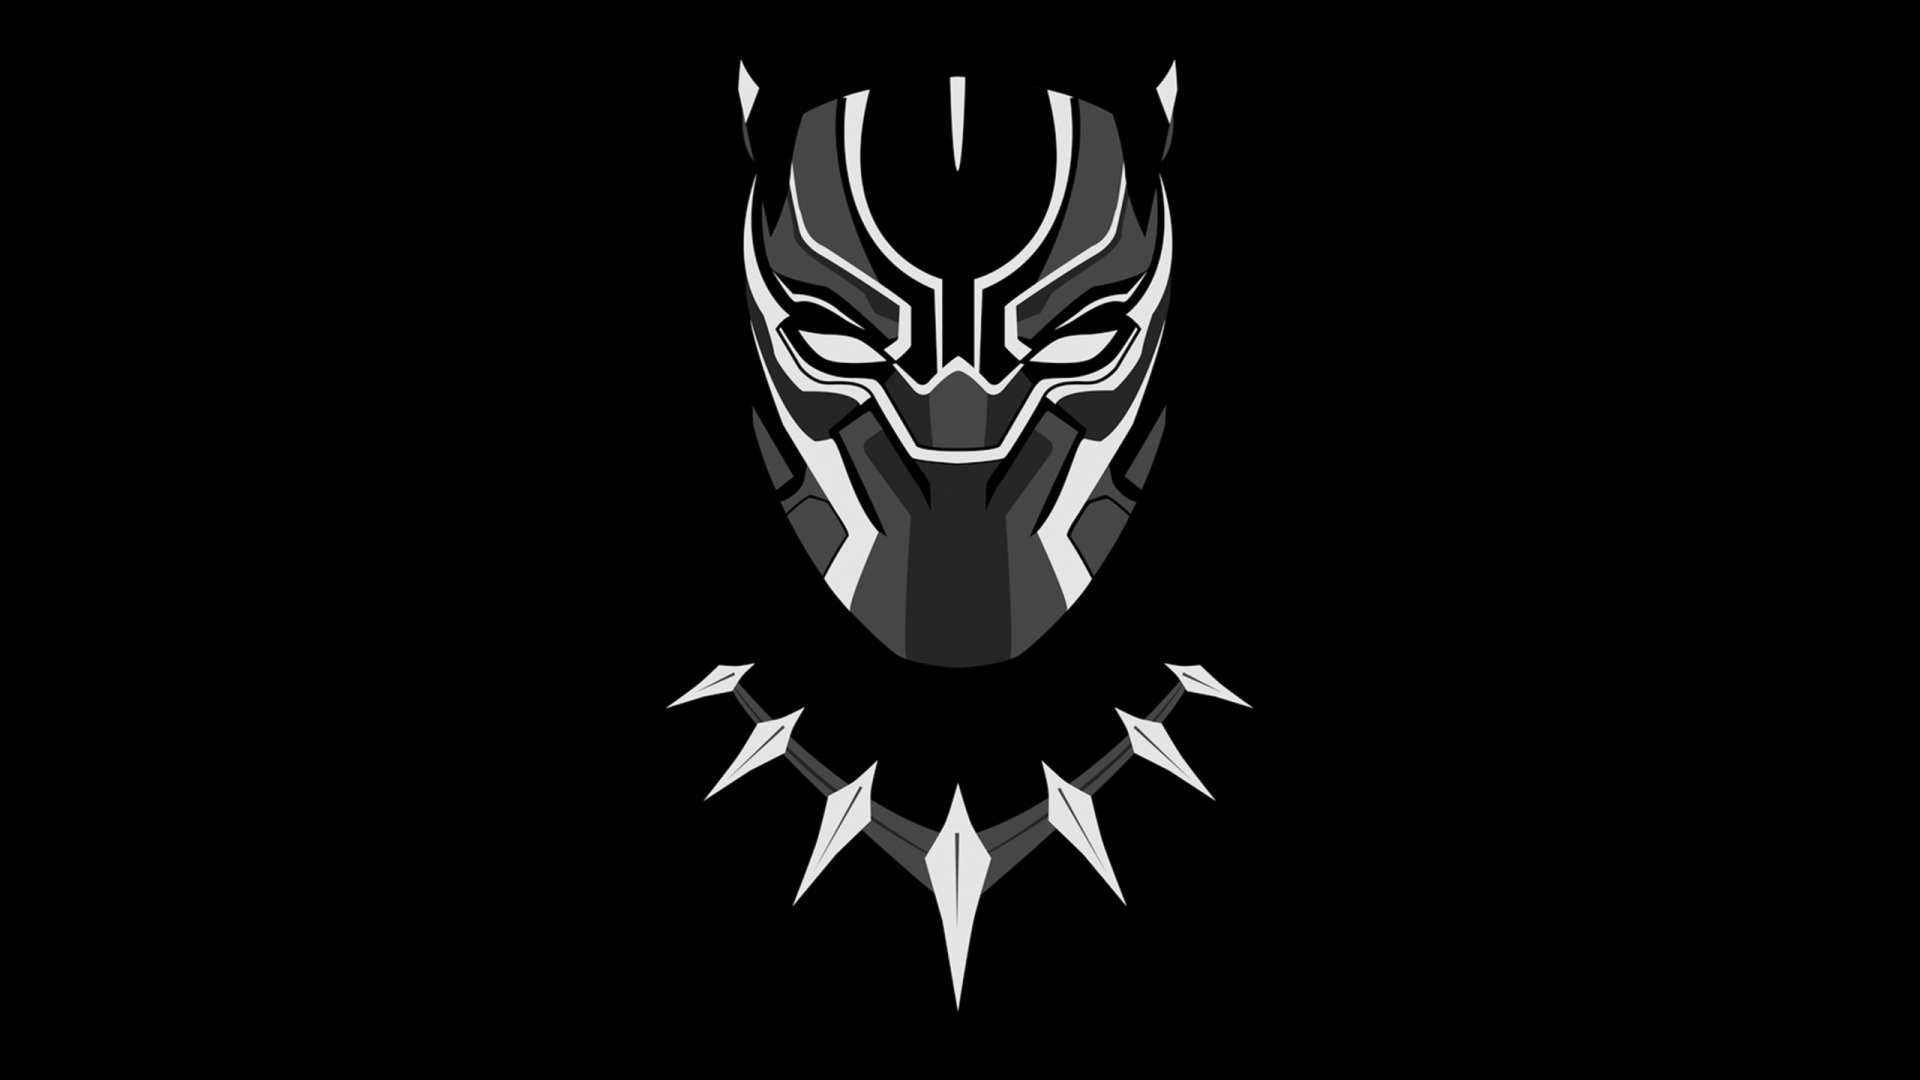 19x1080 Black Panther Minimal Artwork 1080p Laptop Full Hd Wallpaper Hd Movies 4k Wallpapers Images Photos And Background